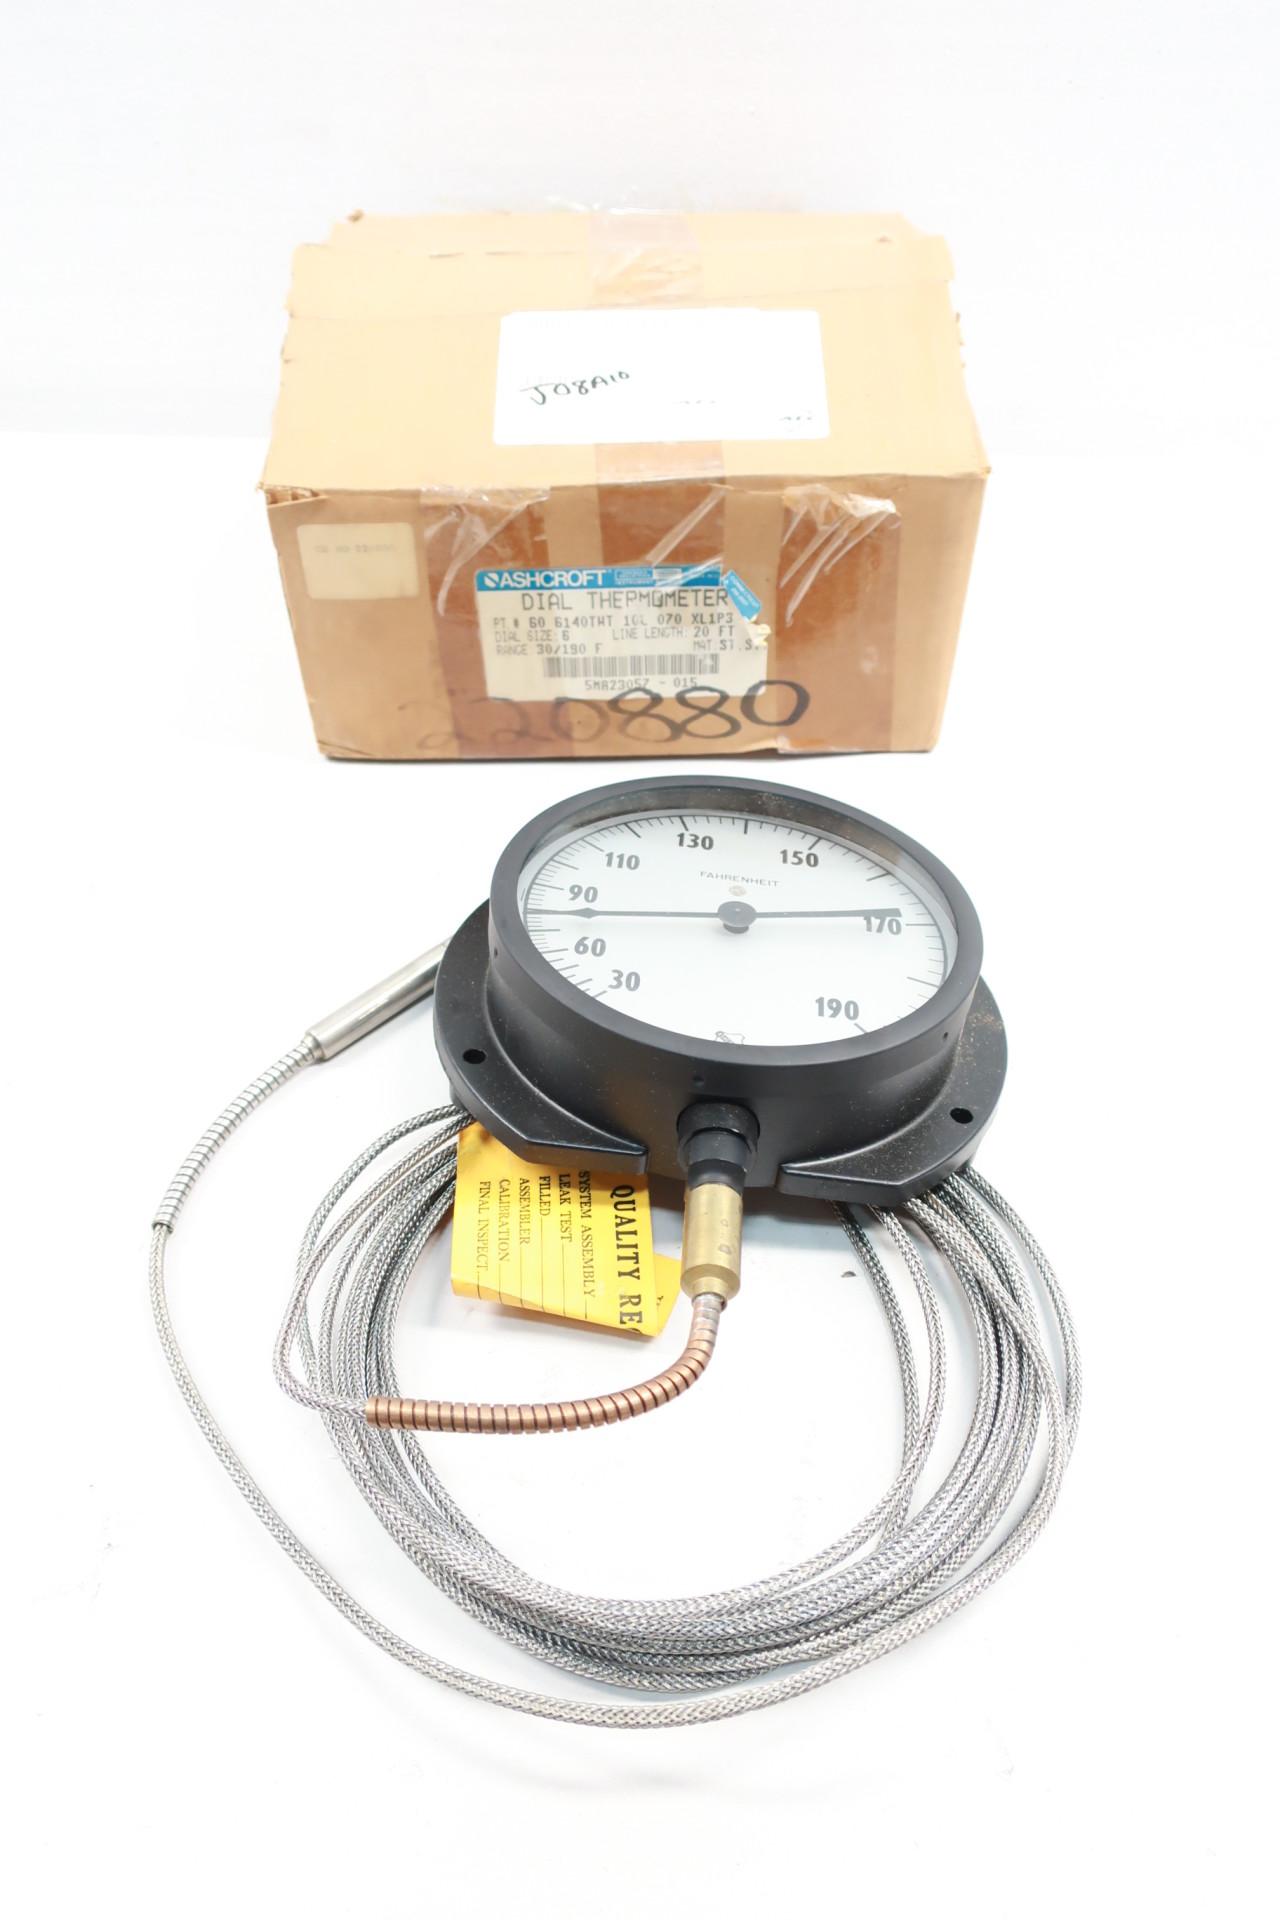 Ashcroft 60 6140TWT 10L 070 XL1P3 Dial Thermometer 6in 20ft 30-190f